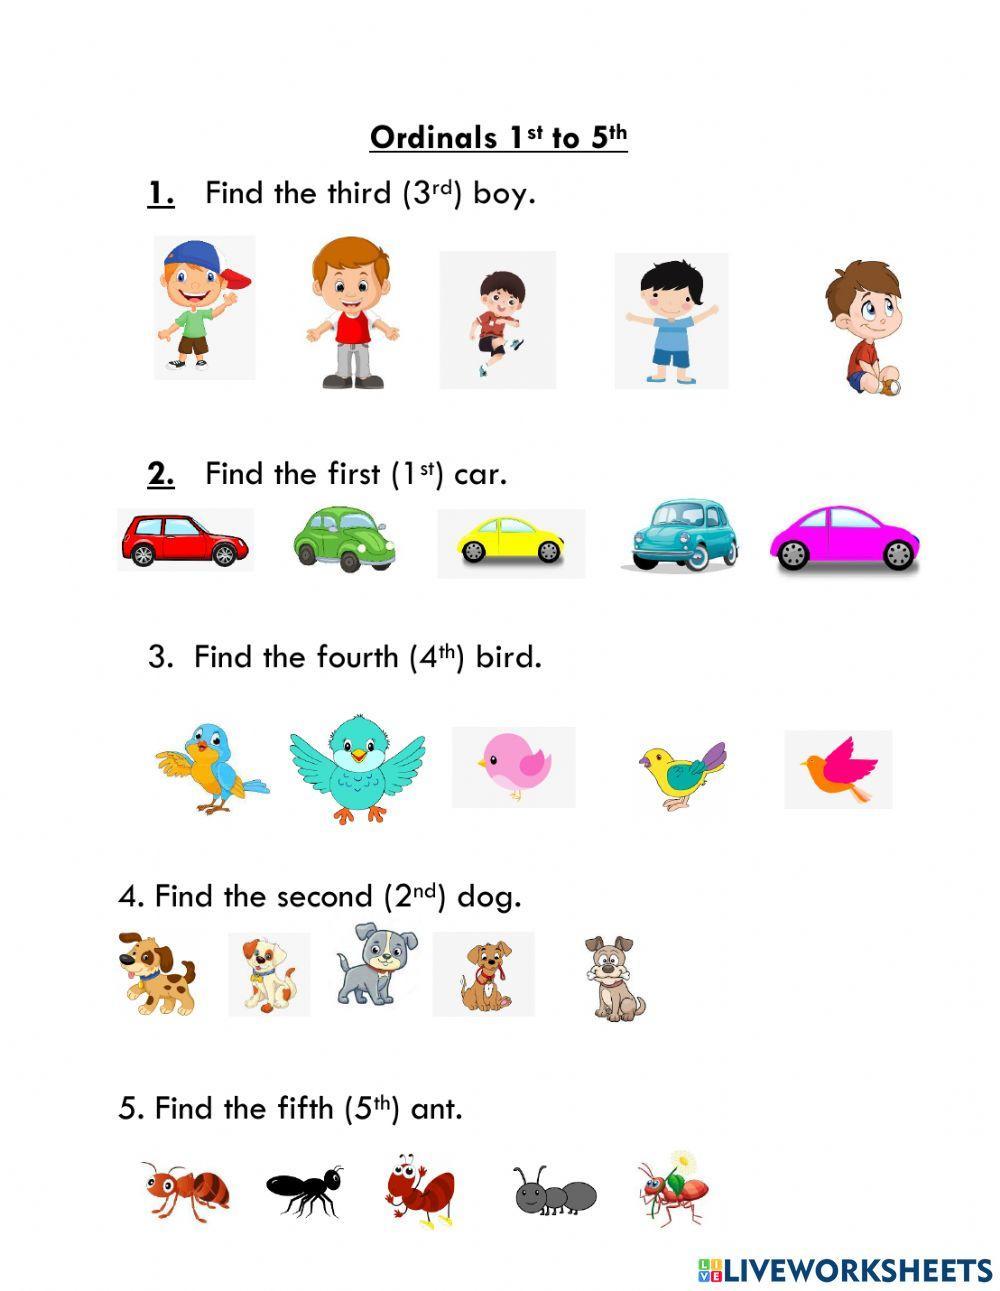 Ordinal Numbers 1st to 5th